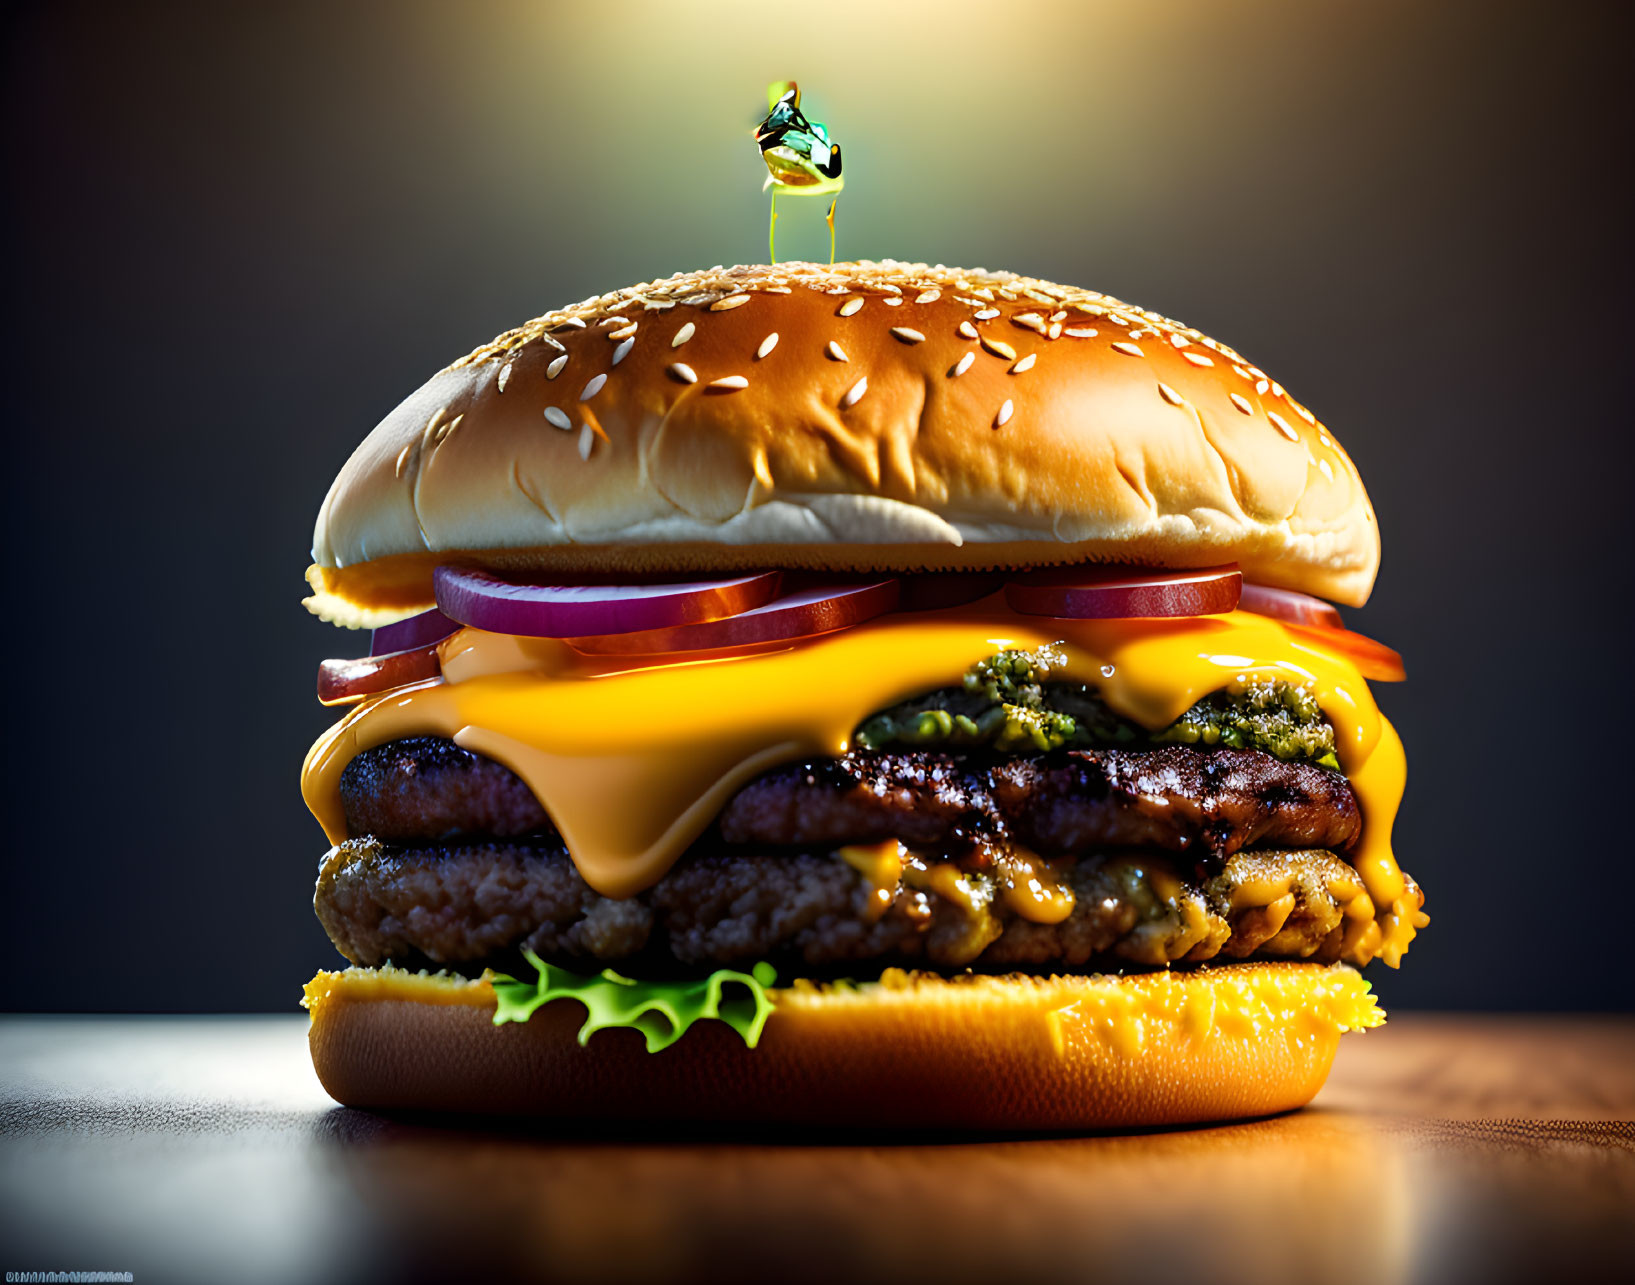 Juicy double cheeseburger with lettuce, onions, and sesame seed bun in dramatic backlight